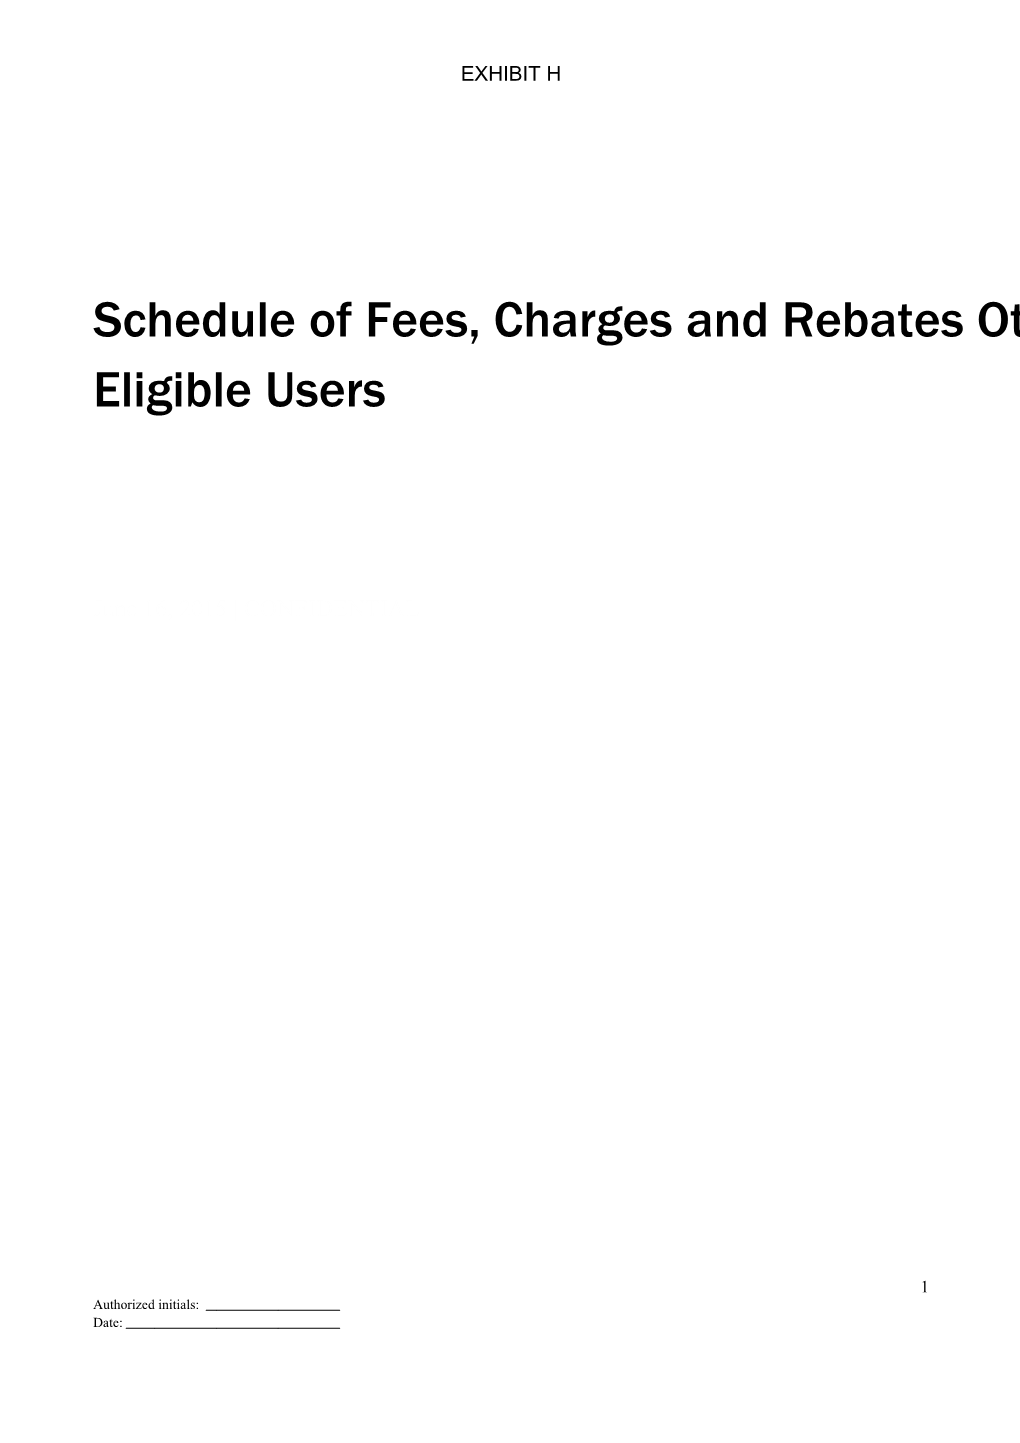 Schedule of Fees, Charges and Rebatesother Eligible Users